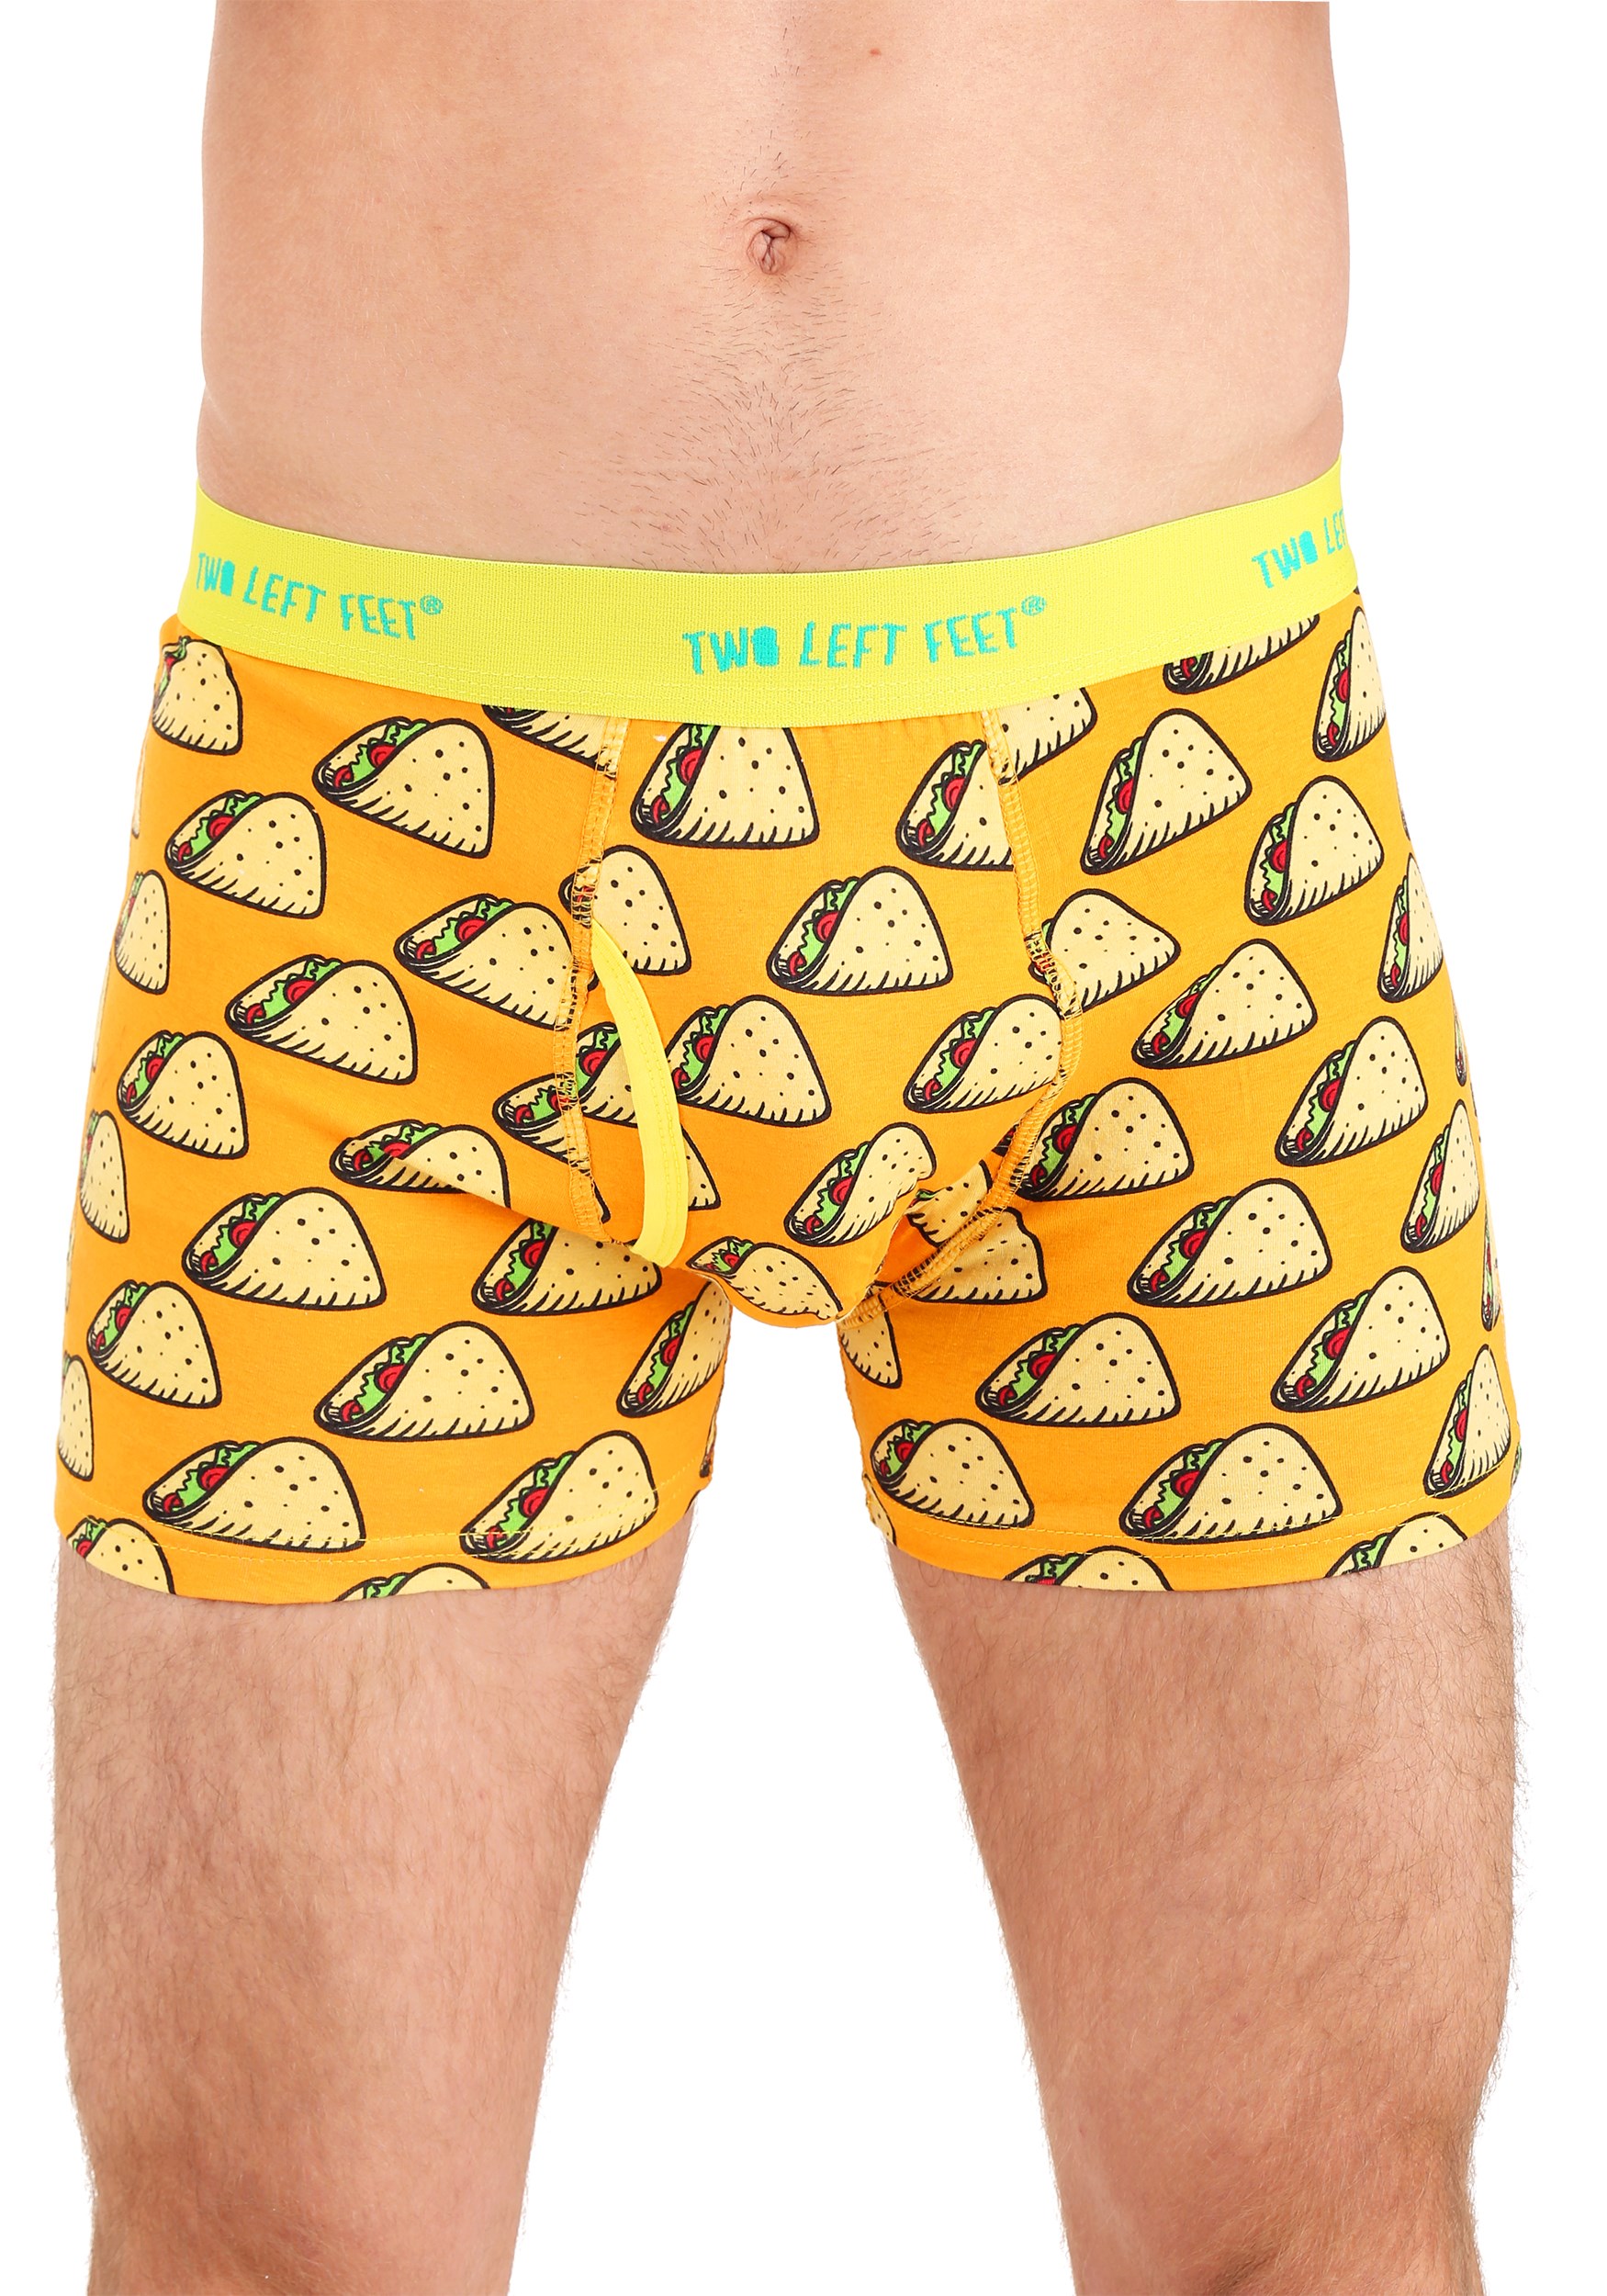 Taco Tuesday Two Left Feet Mens Trunk Boxer Brief Underwear